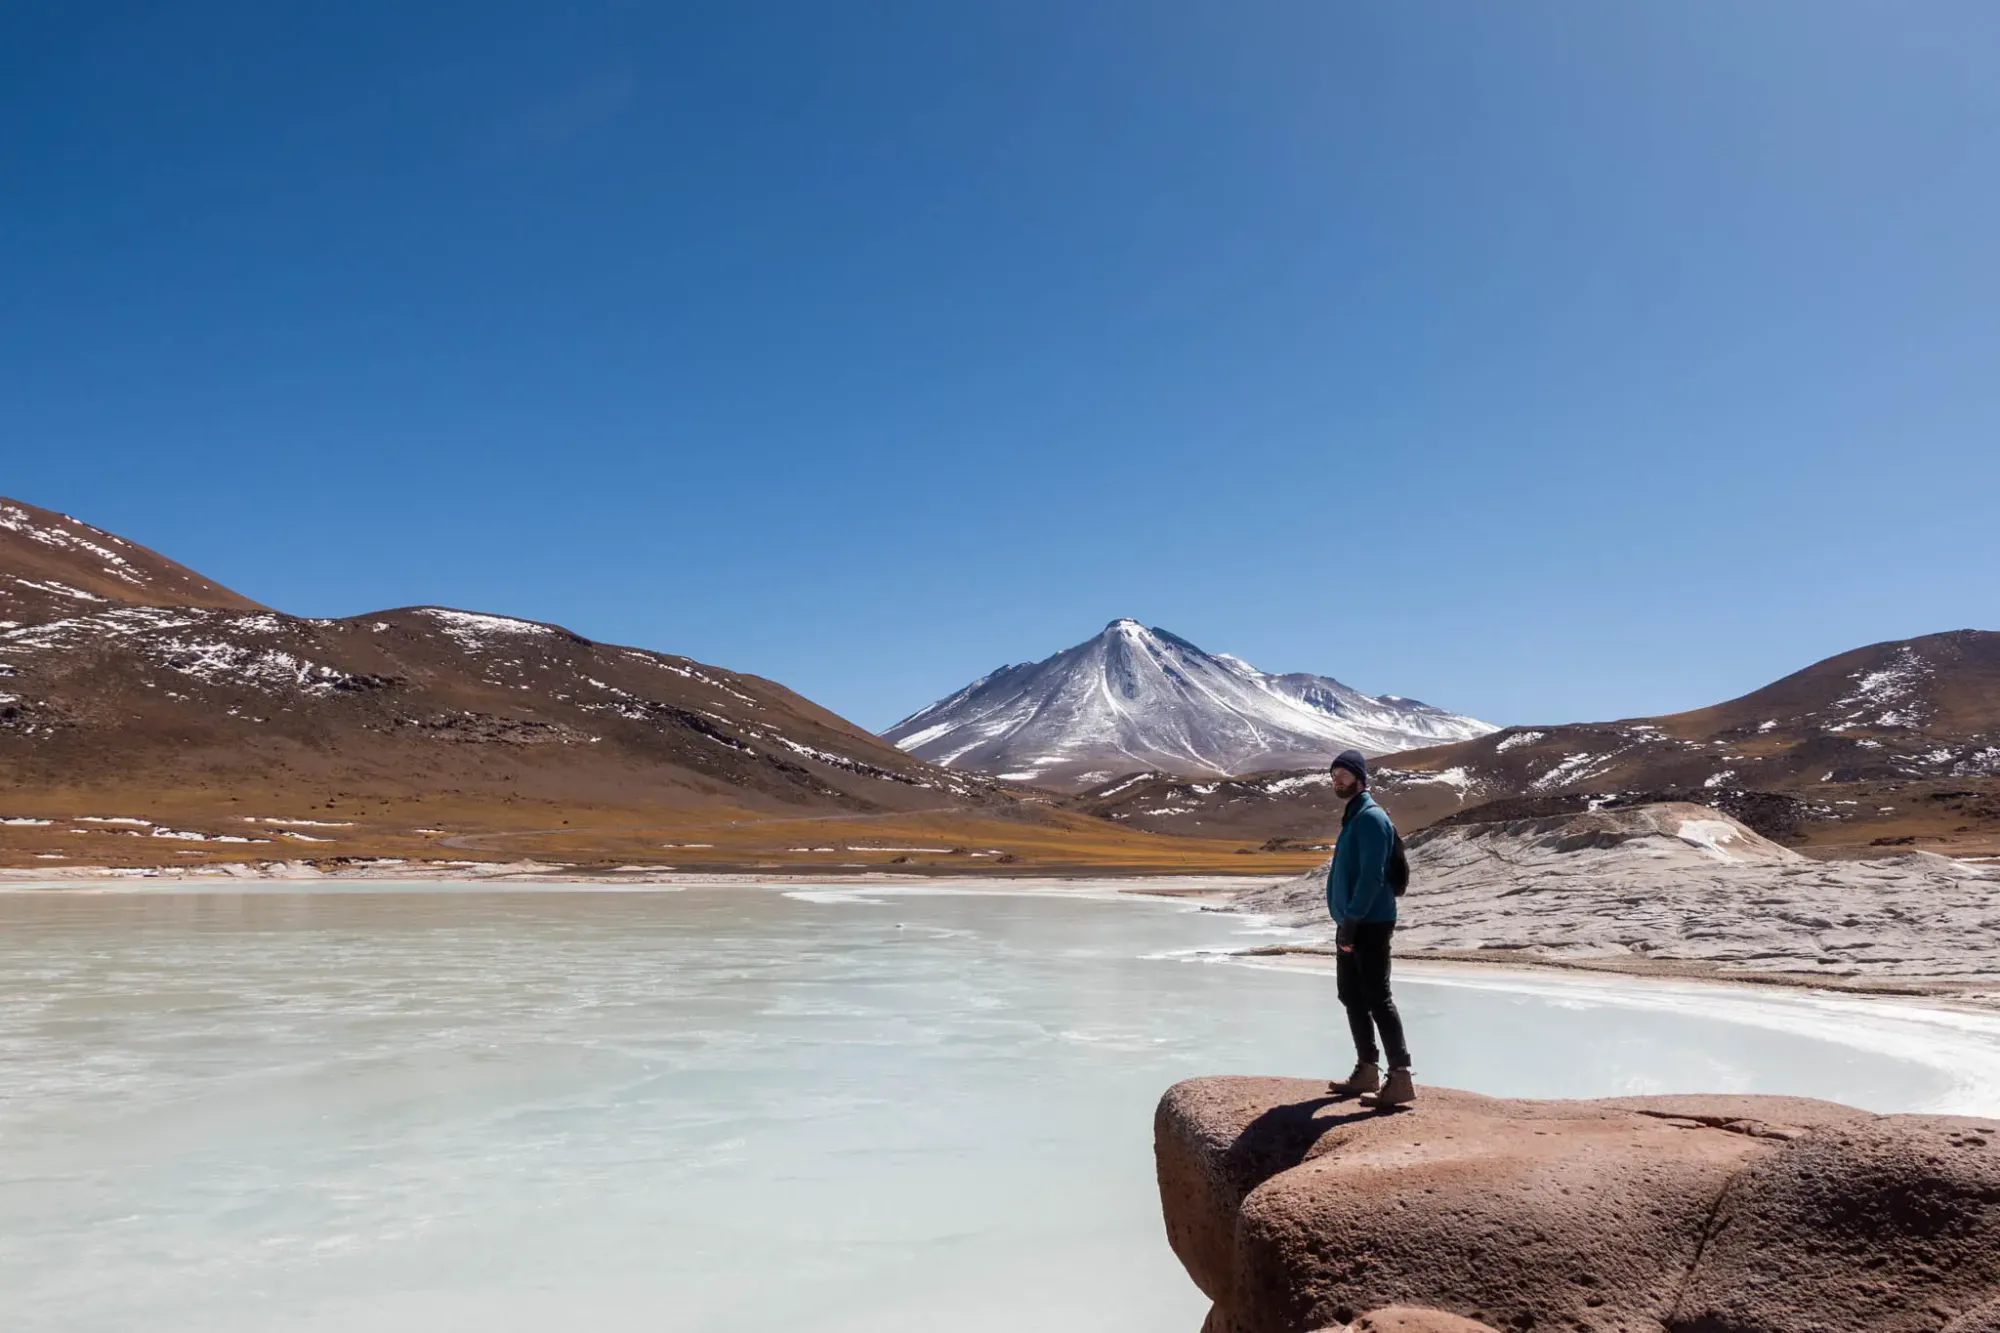 A view from the Piedras Rojas in the Atacama Desert, Chile